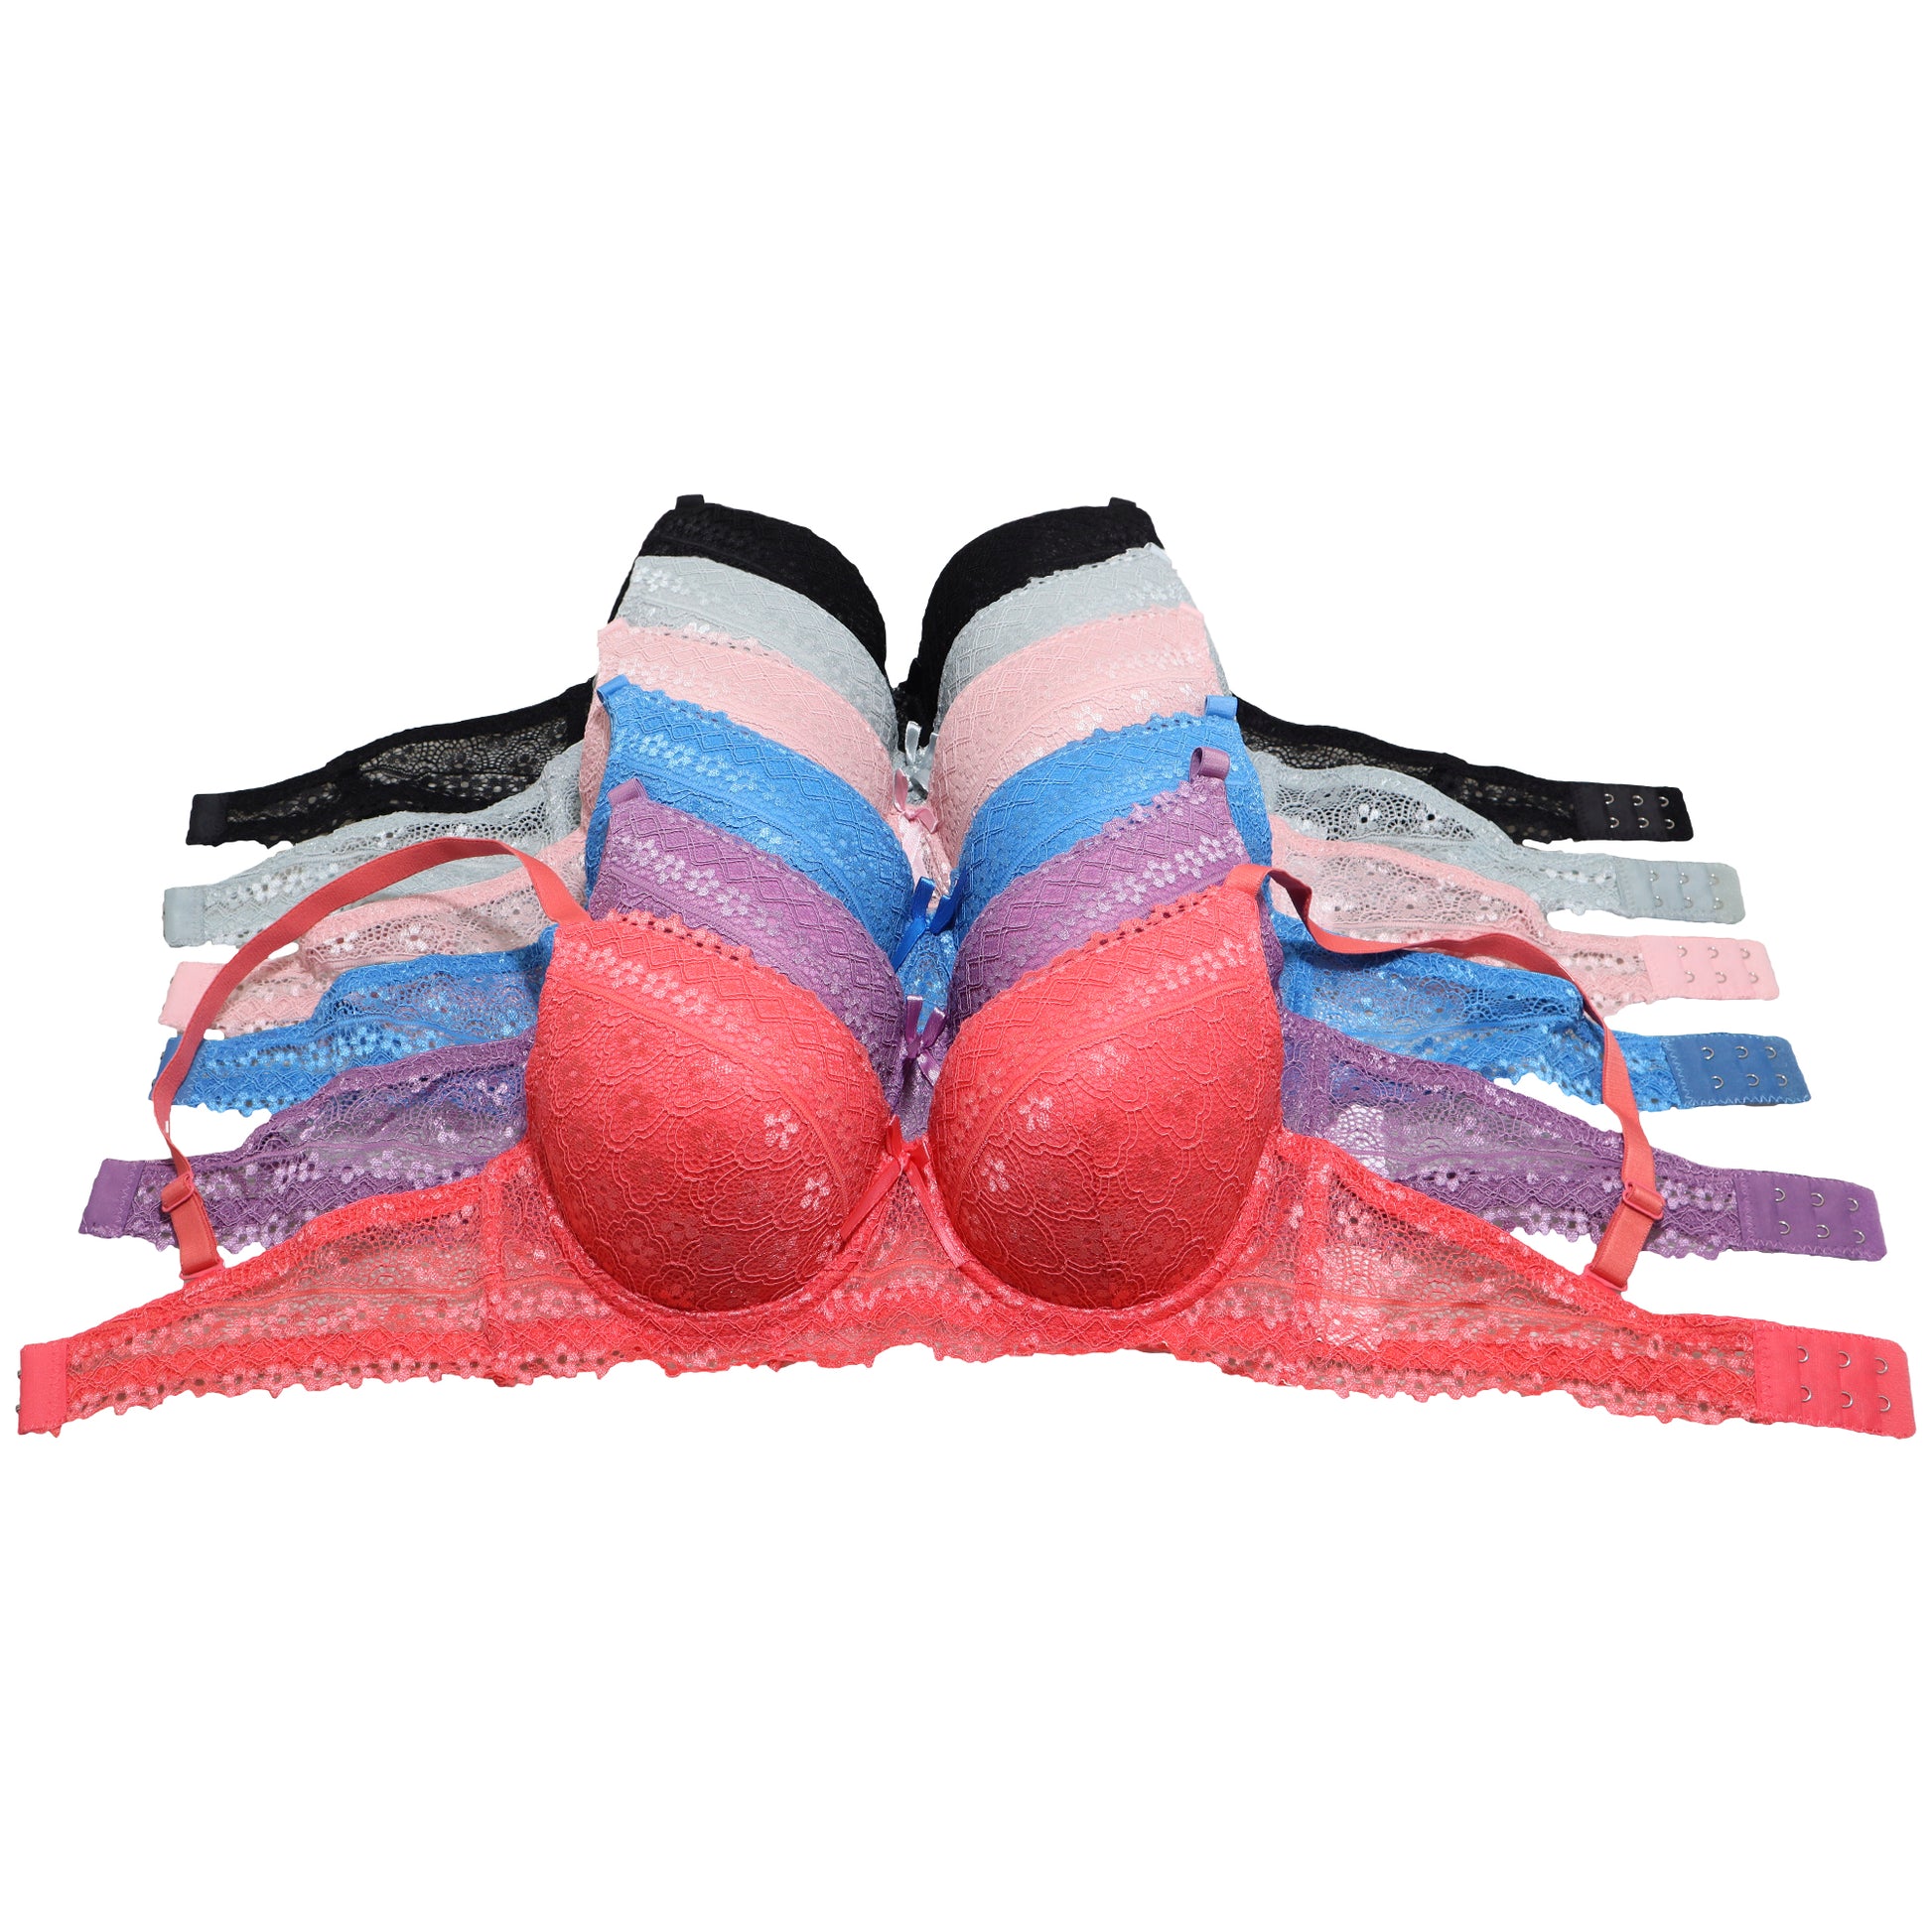 Angelina Matching Bras and Panties Set with Daisy Lace Design